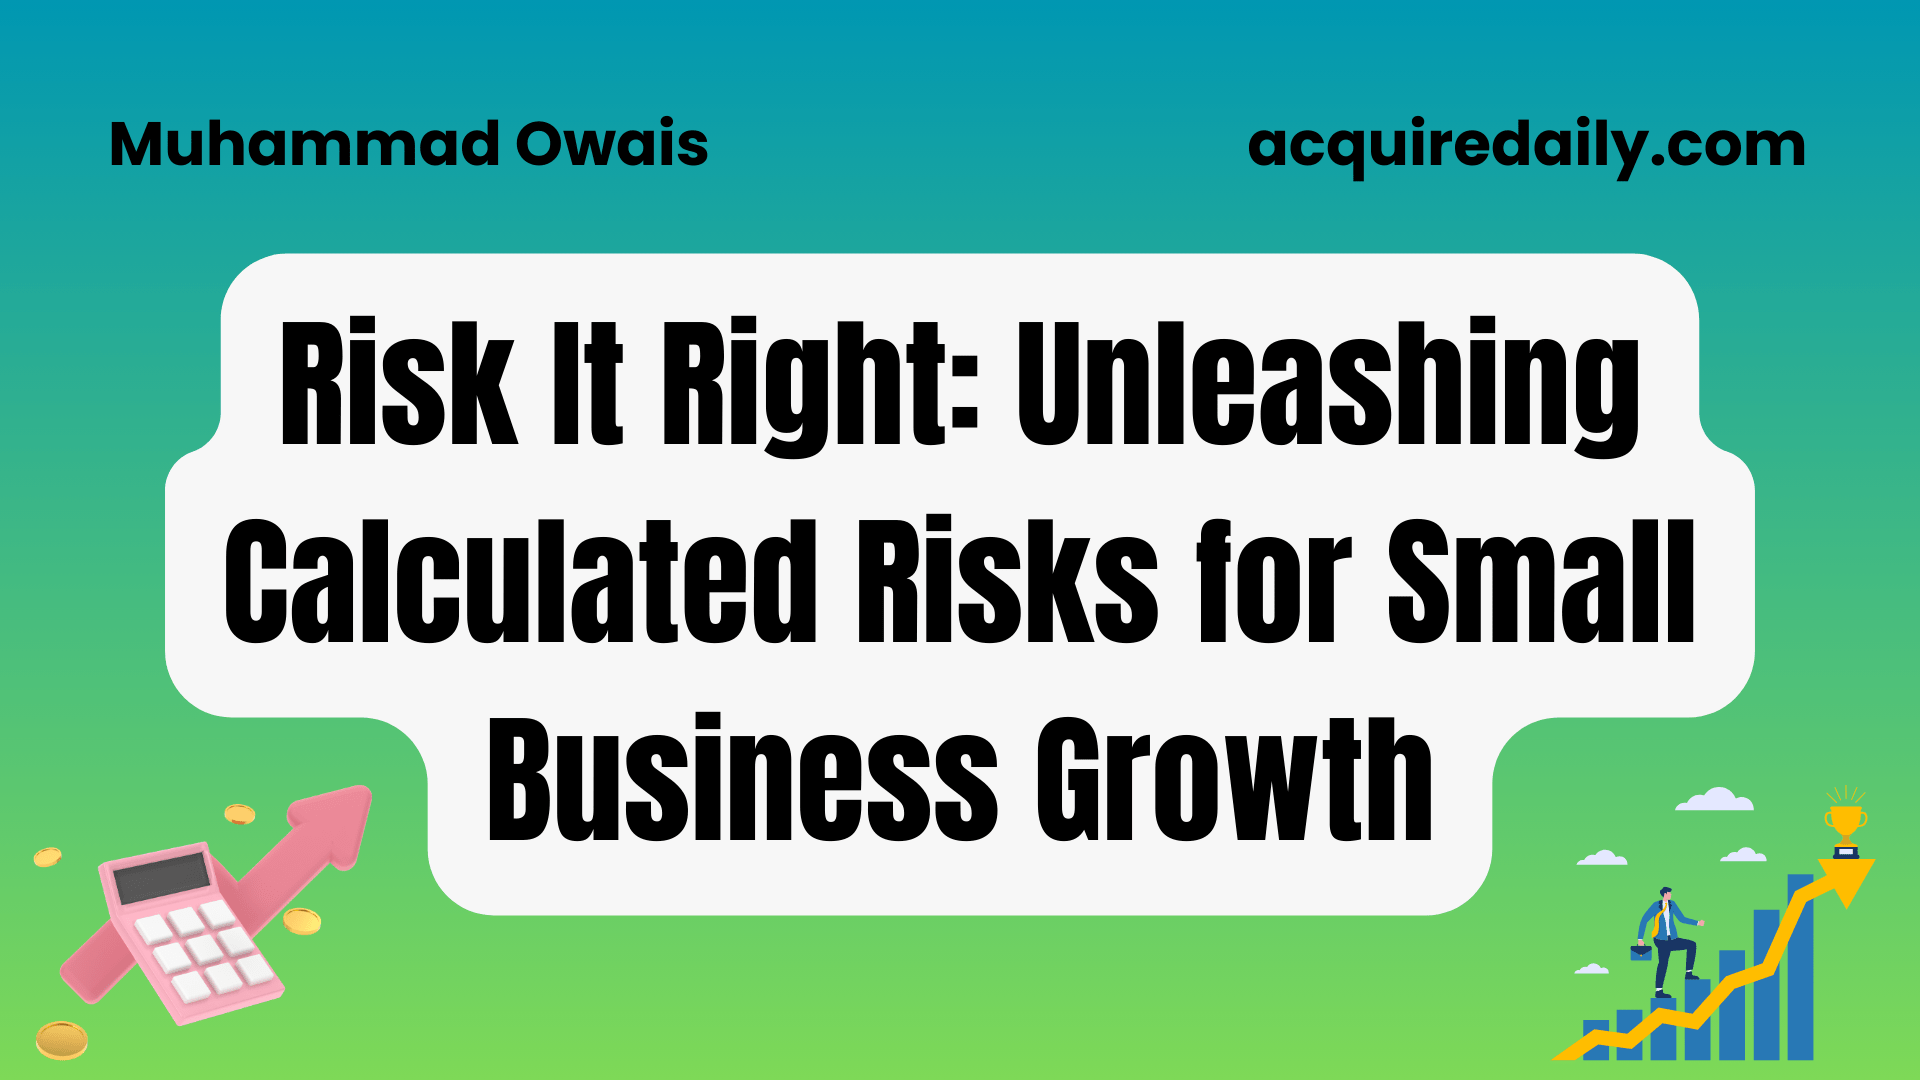 Risk It Right: Unleashing Calculated Risks for Small Business Growth - Acquire Daily